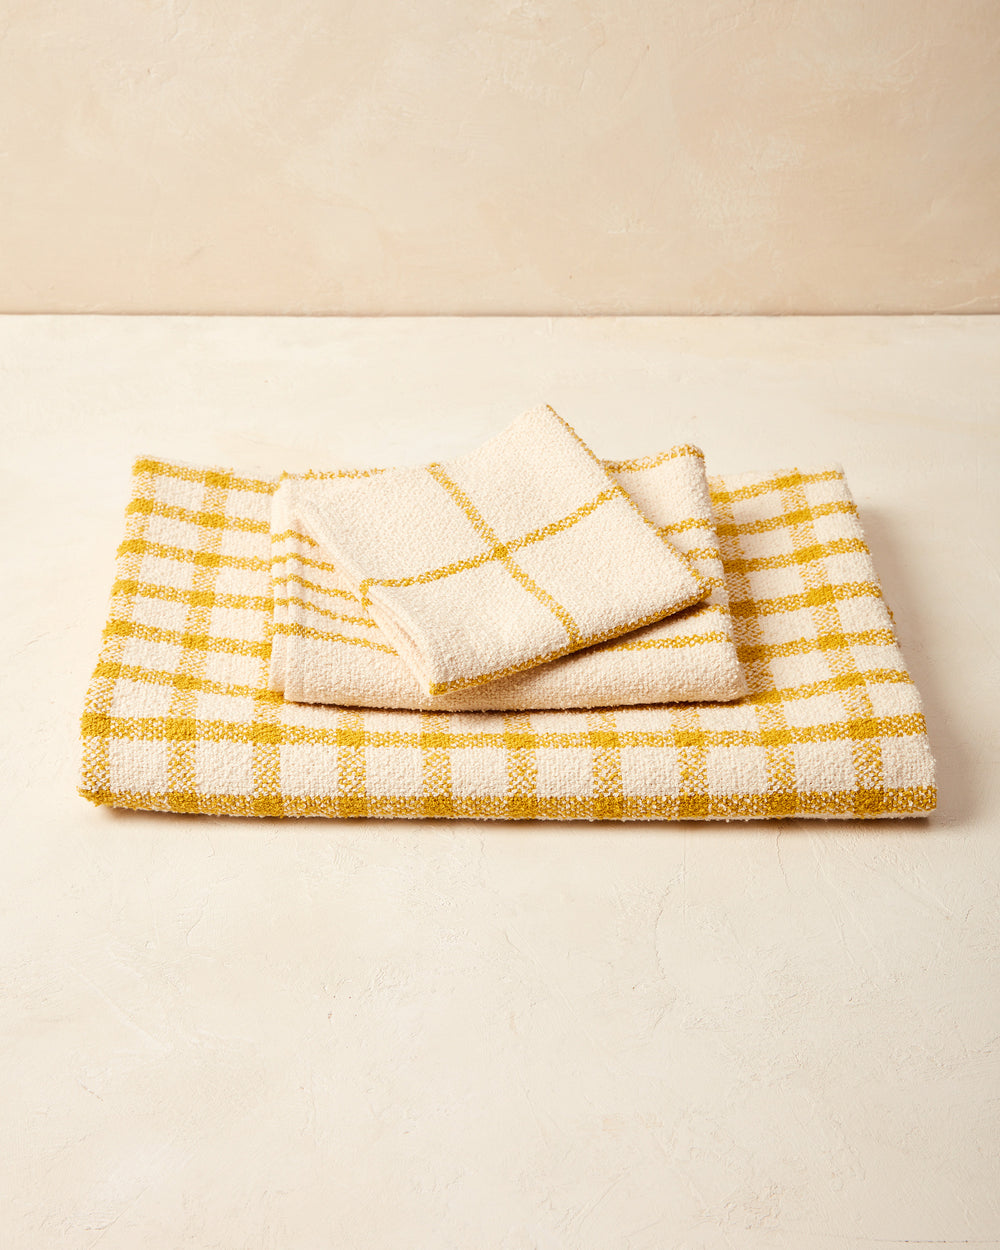 Everyday Bath Towel Set in Goldenrod - Ethical Home Decor